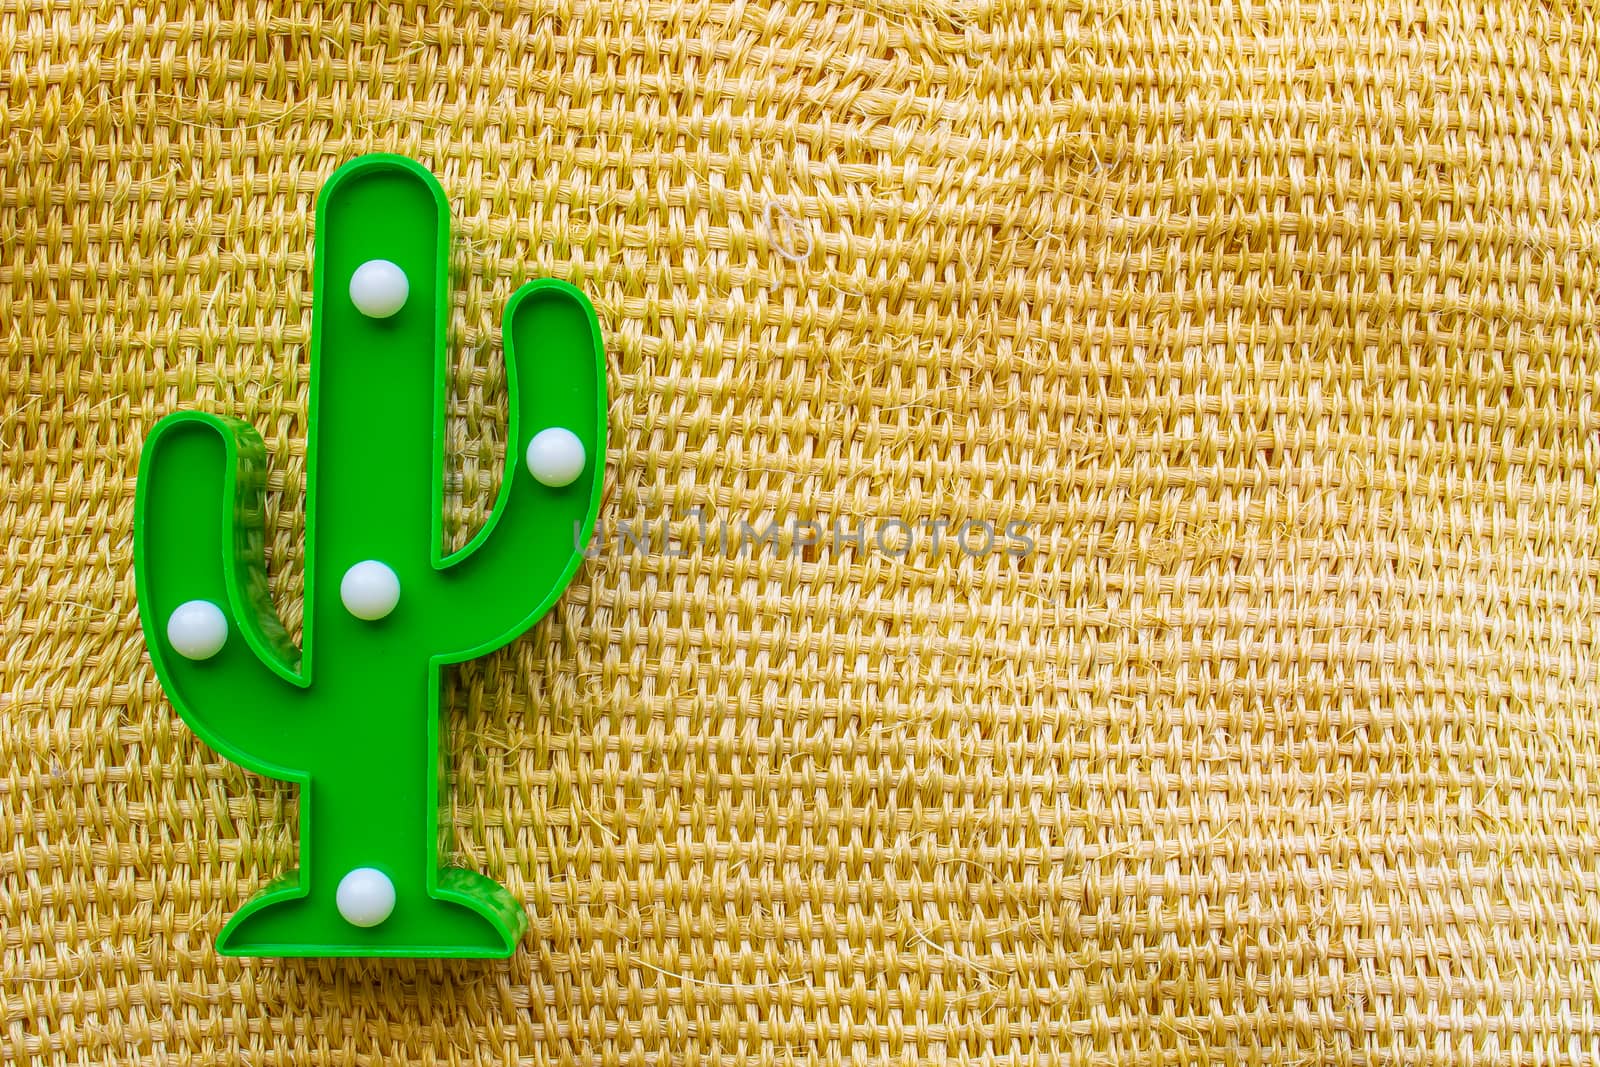 Cinco de Mayo background. A cactus on a straw rural bag background texture by oasisamuel